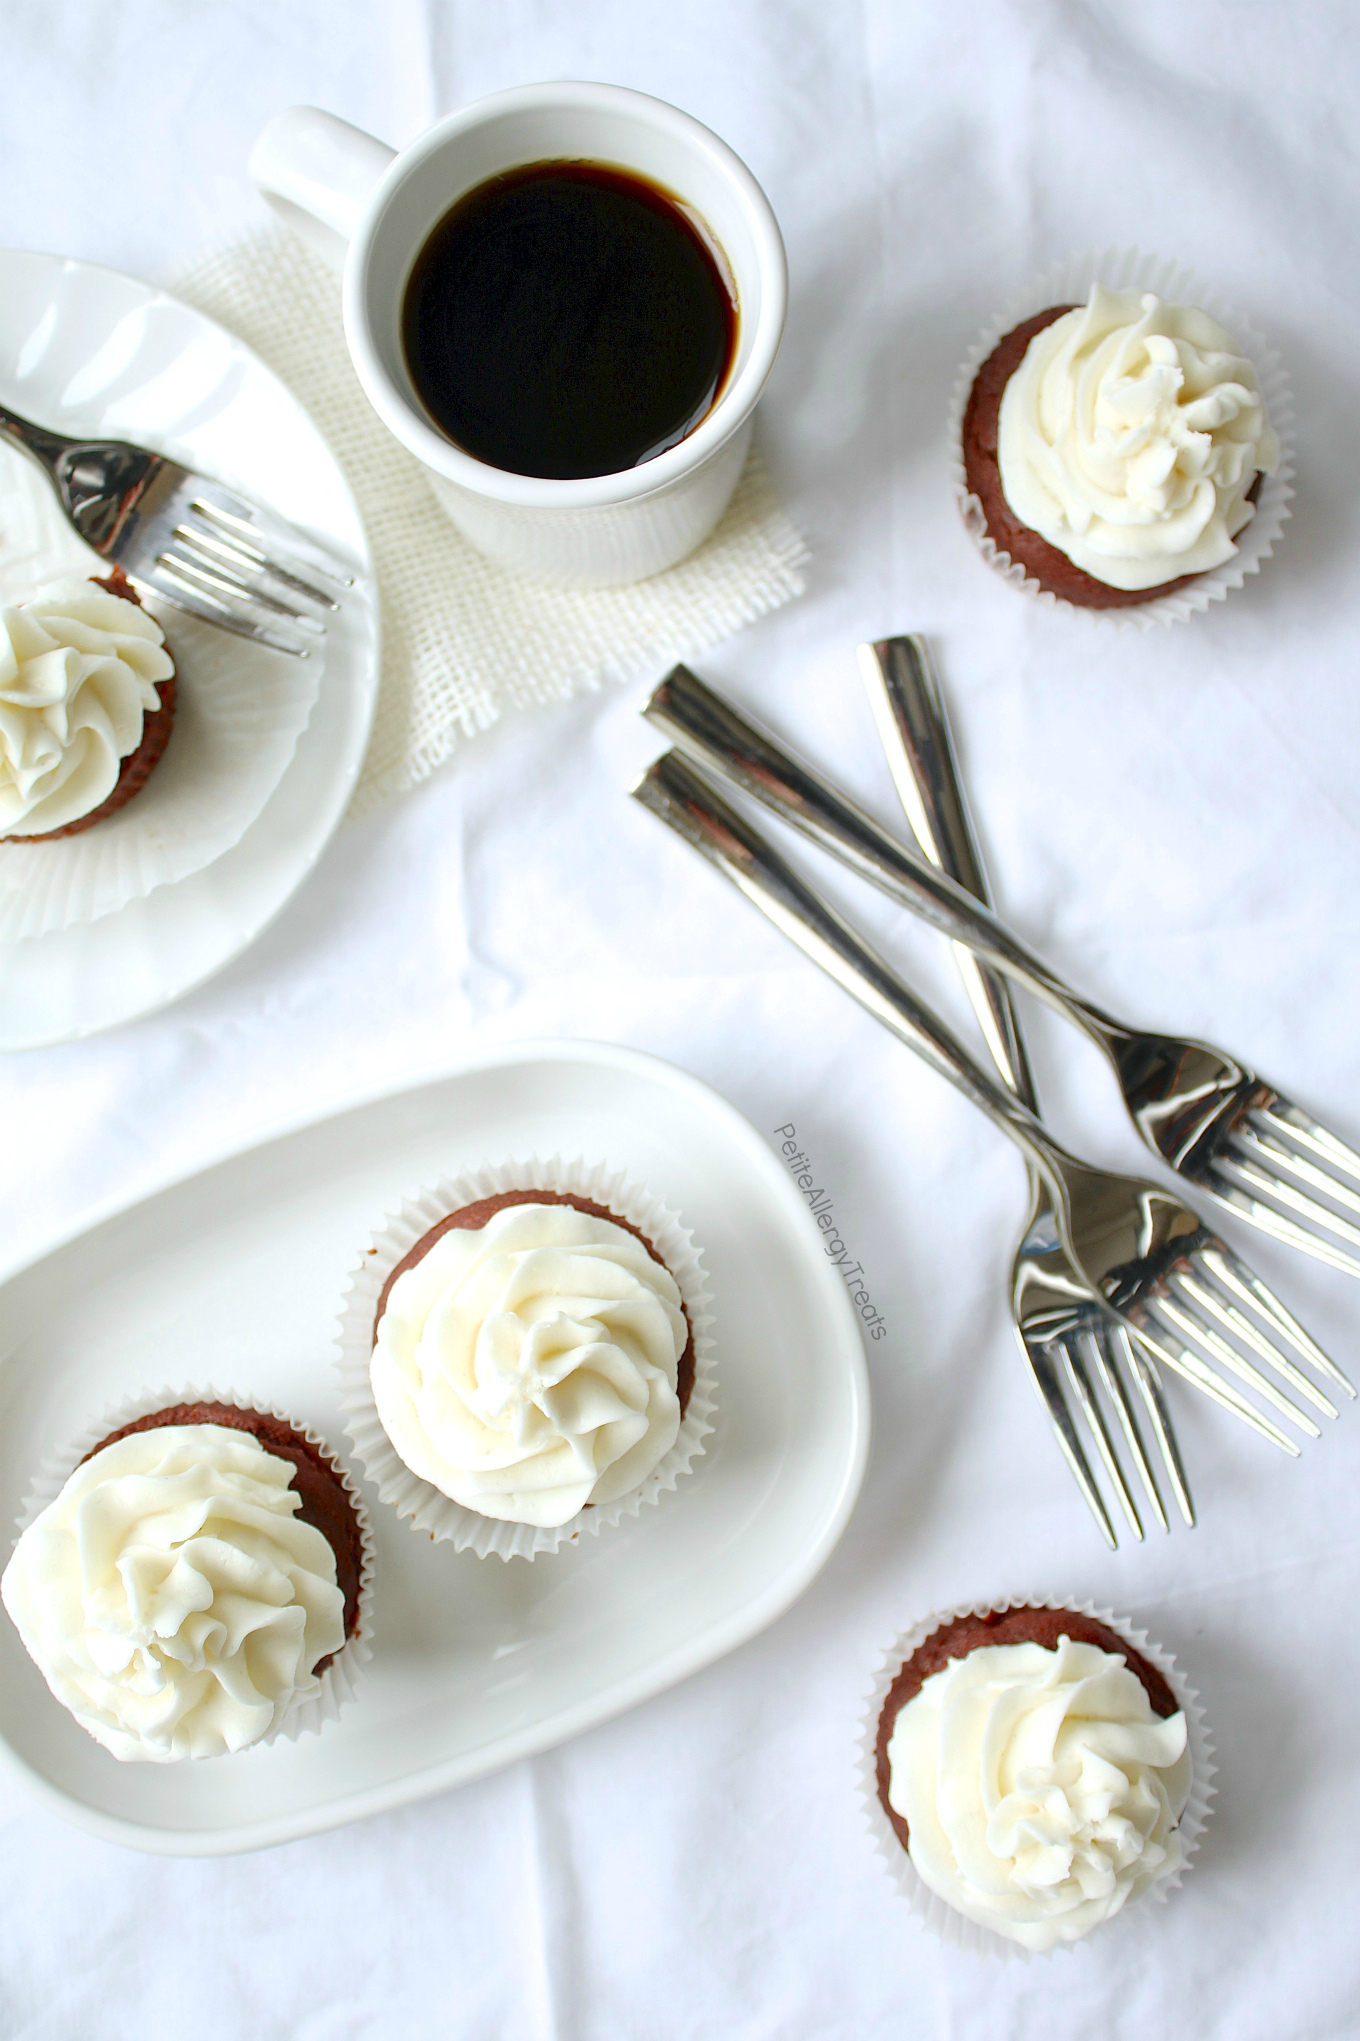 Dye-free Red Velvet Cupcakes Recipe (gluten free vegan)- Naturally colored red velvet cupcakes made dairy free, egg free and Vegan. Food Allergy friendly!